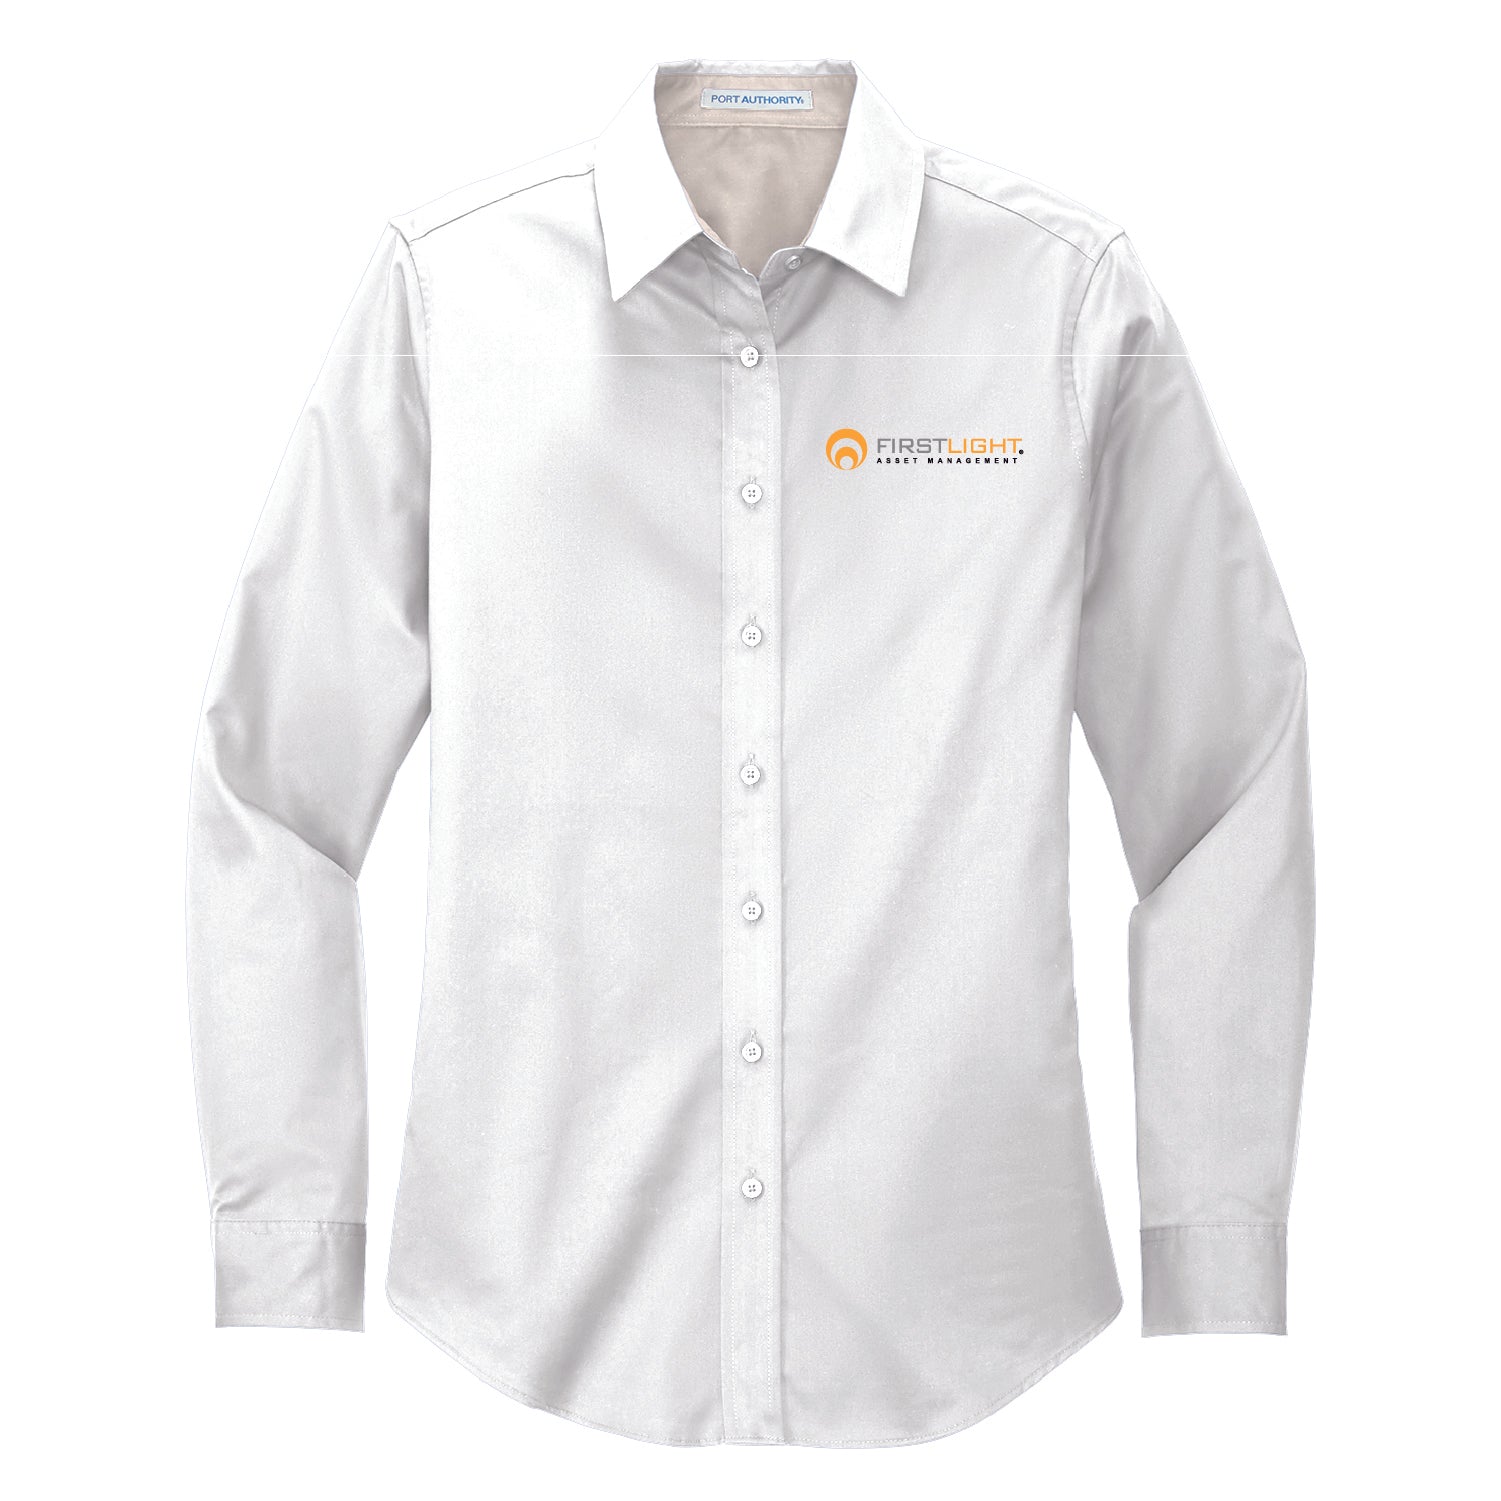 First Light Ladies Long Sleeve Easy Care Shirt - DSP On Demand